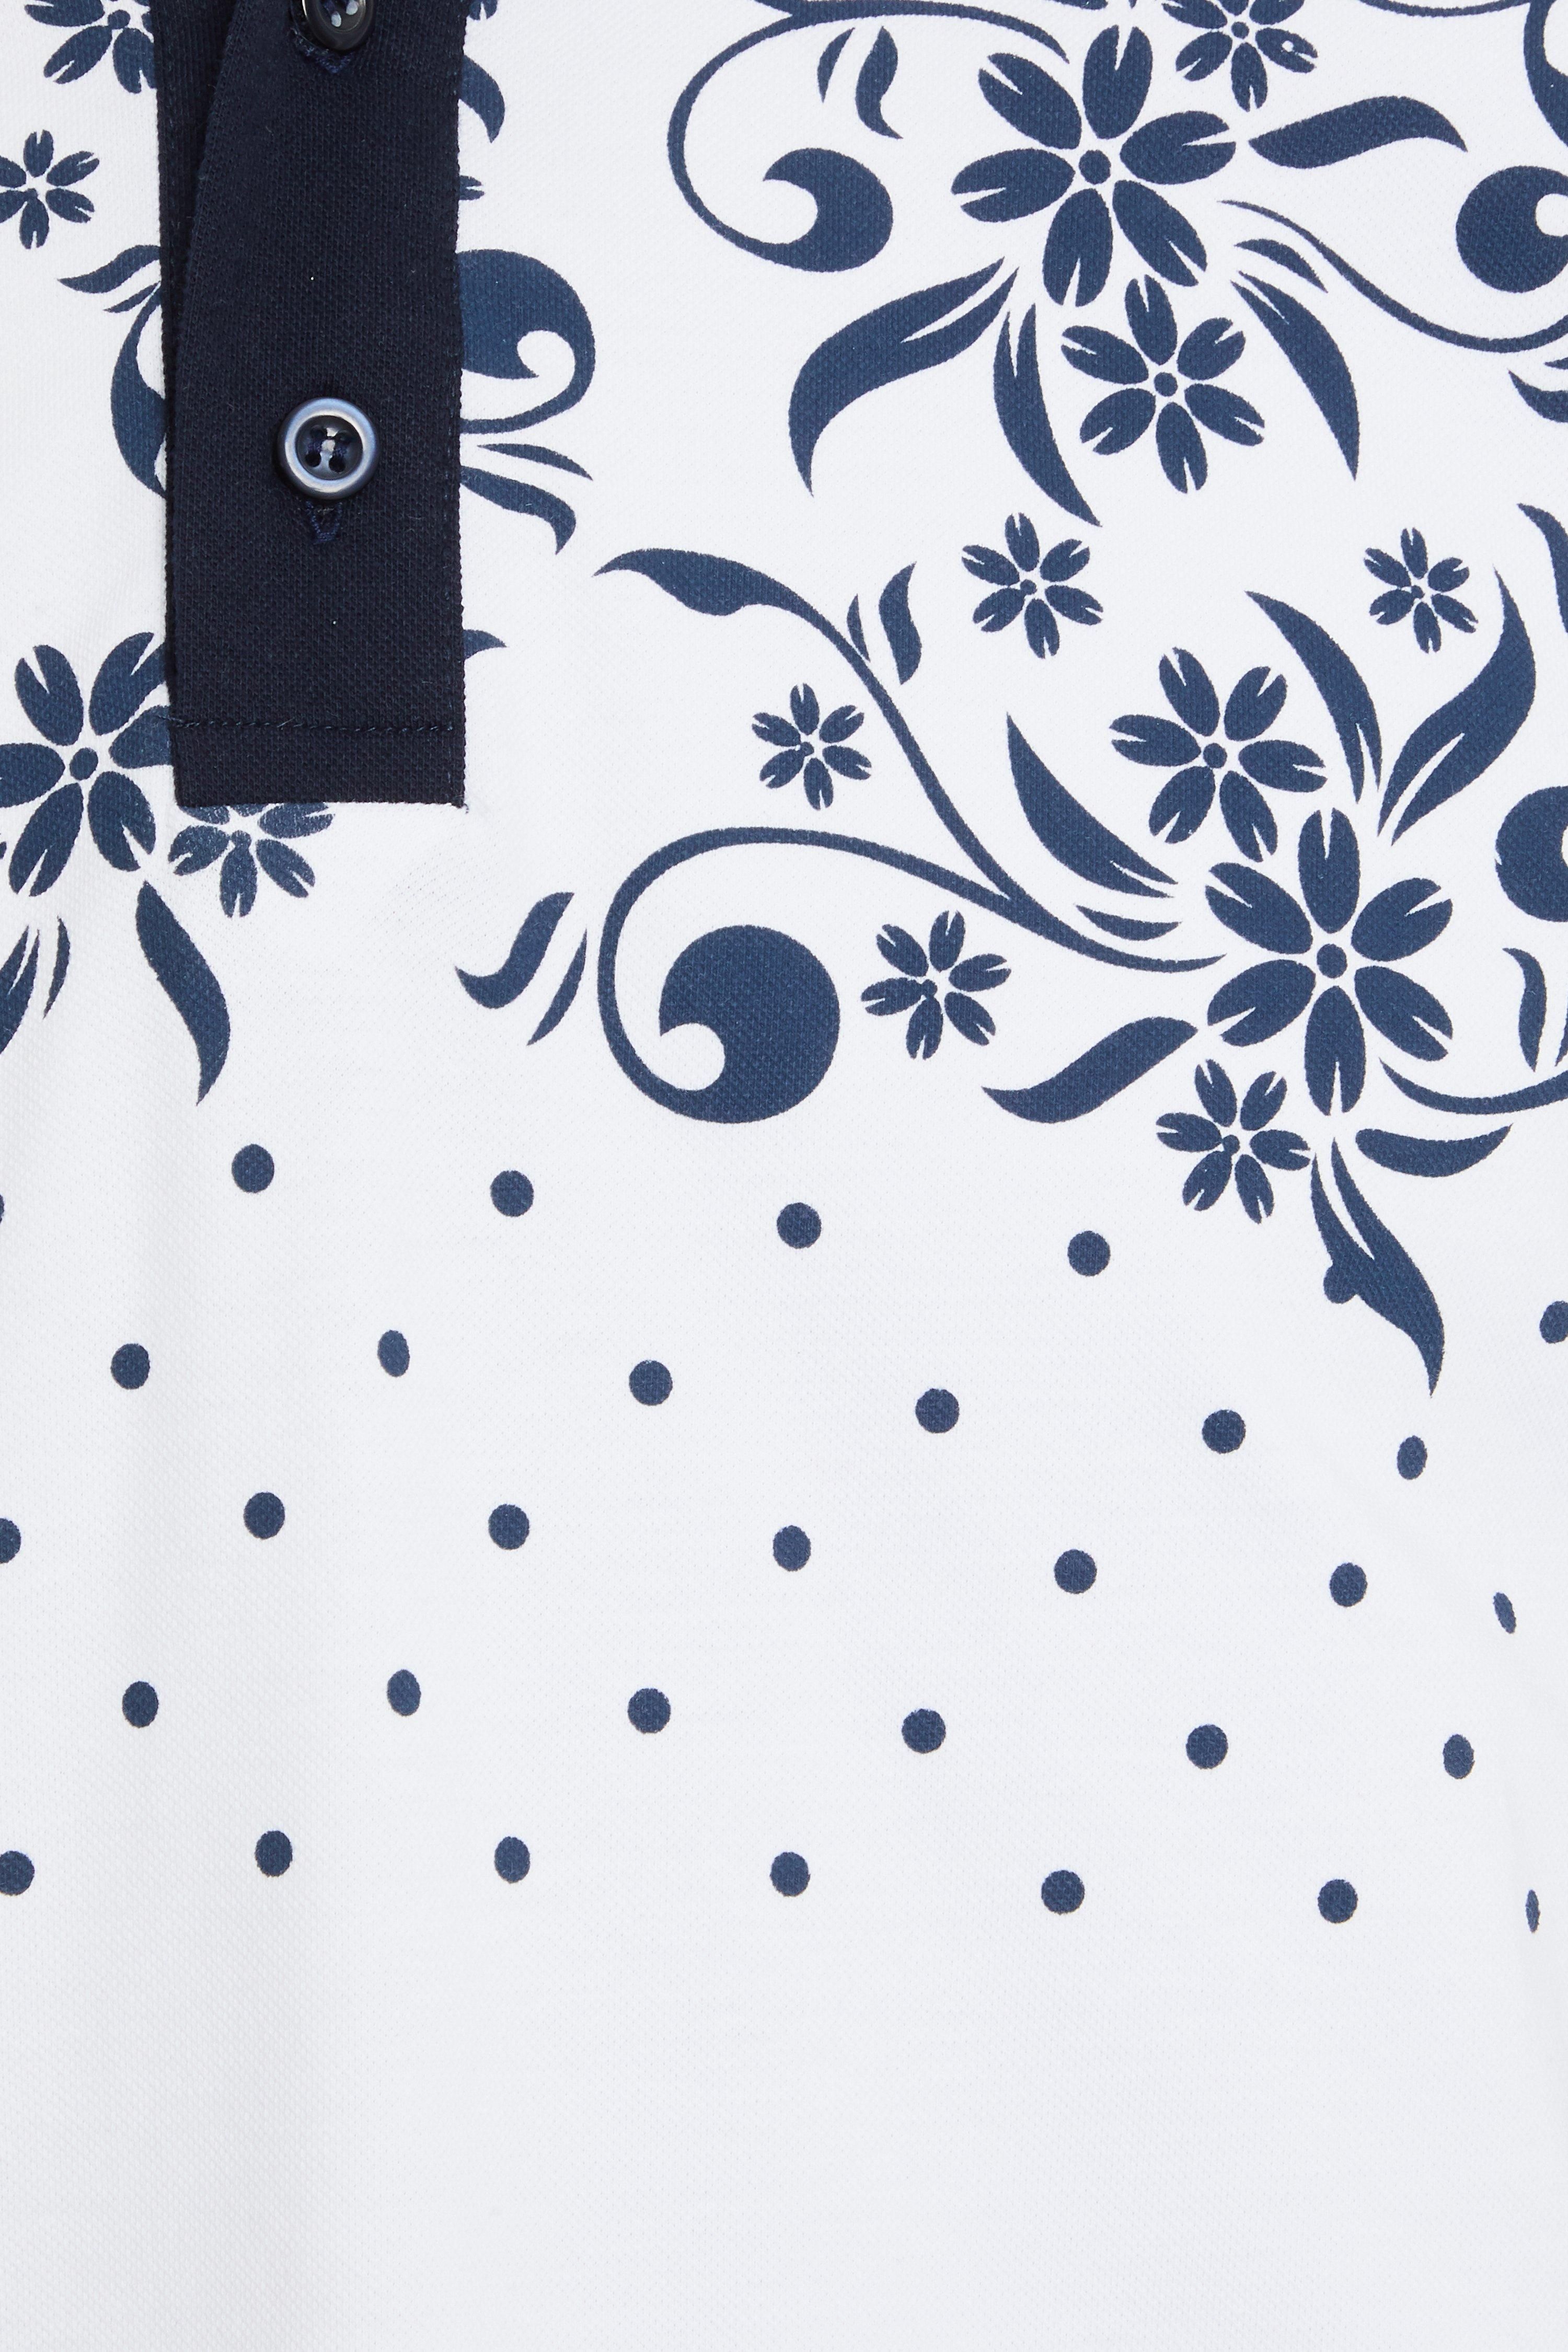 - Floral and spots print  - Short sleeve  - Button fastening  - Contrast collar and sleeve trim